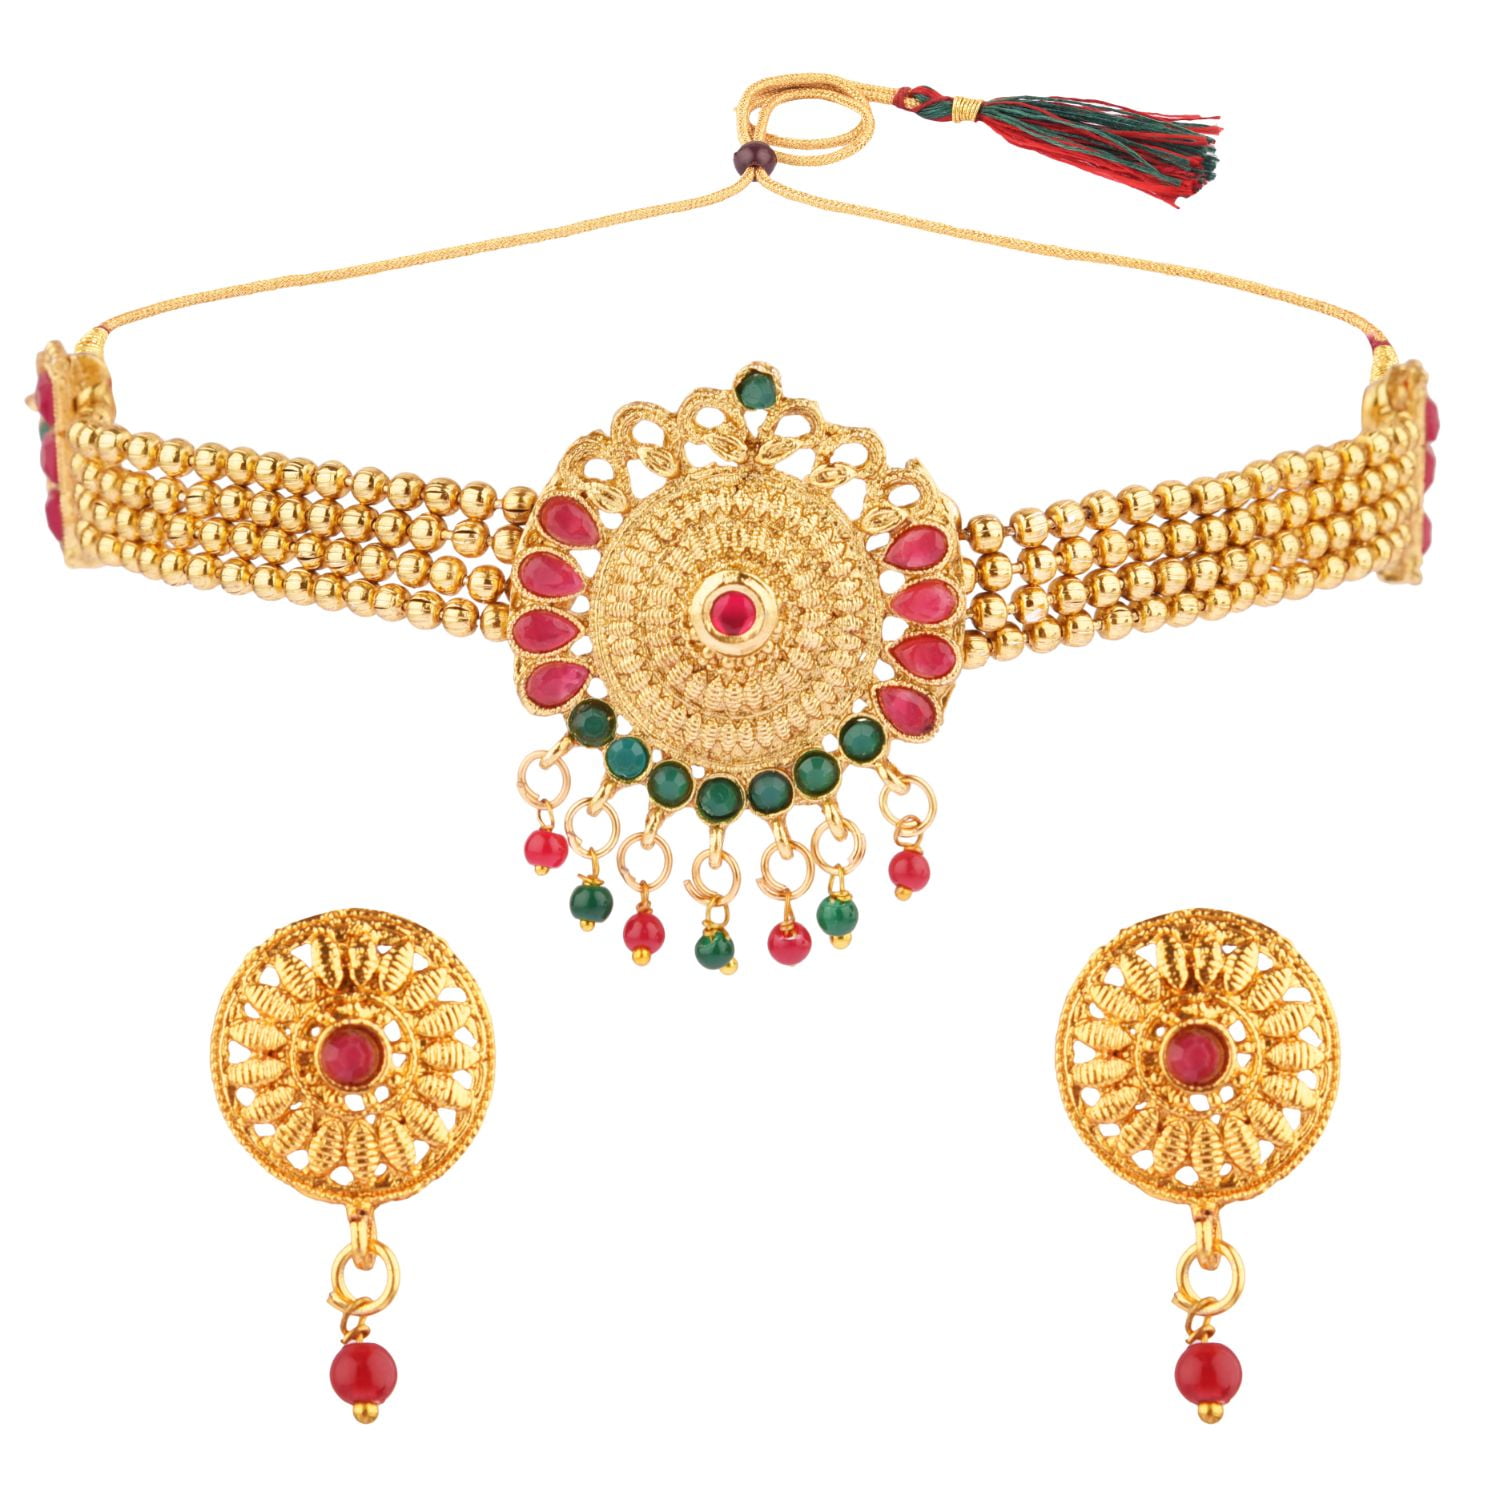 Buy Traditional Necklaces Online - Latest Gold Light weight Necklace designs